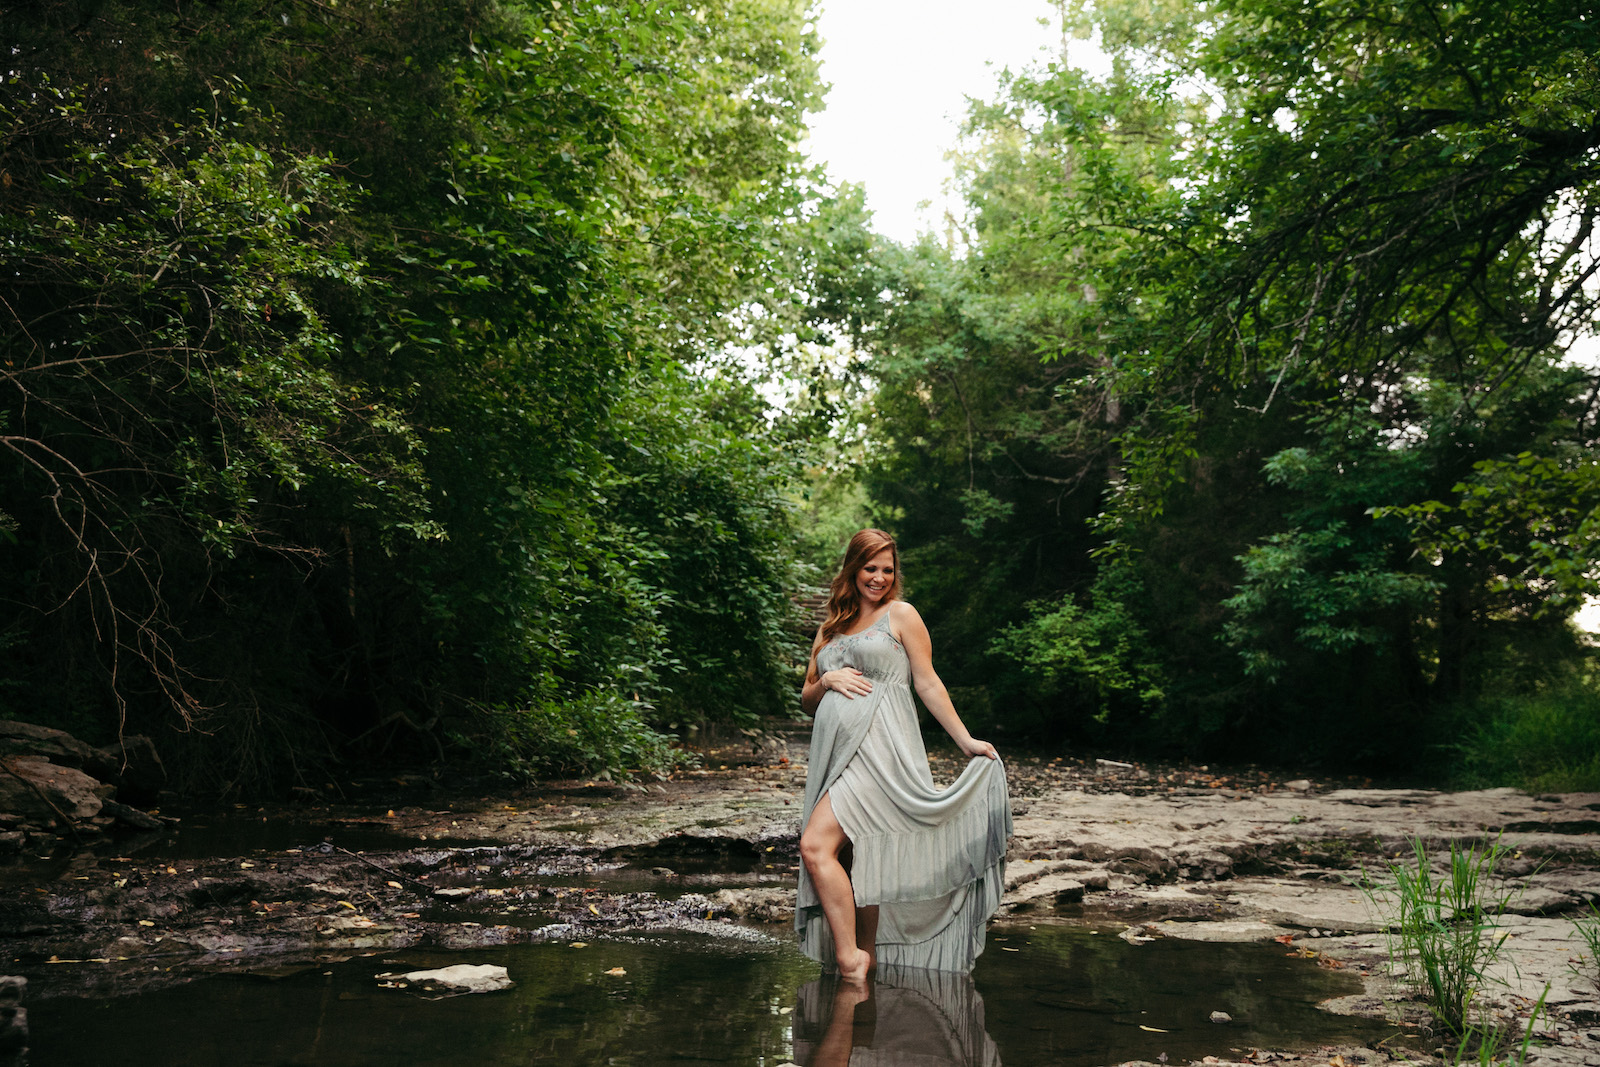 Natalie’s Outdoorsy Maternity Session from SheHeWe Family Photography